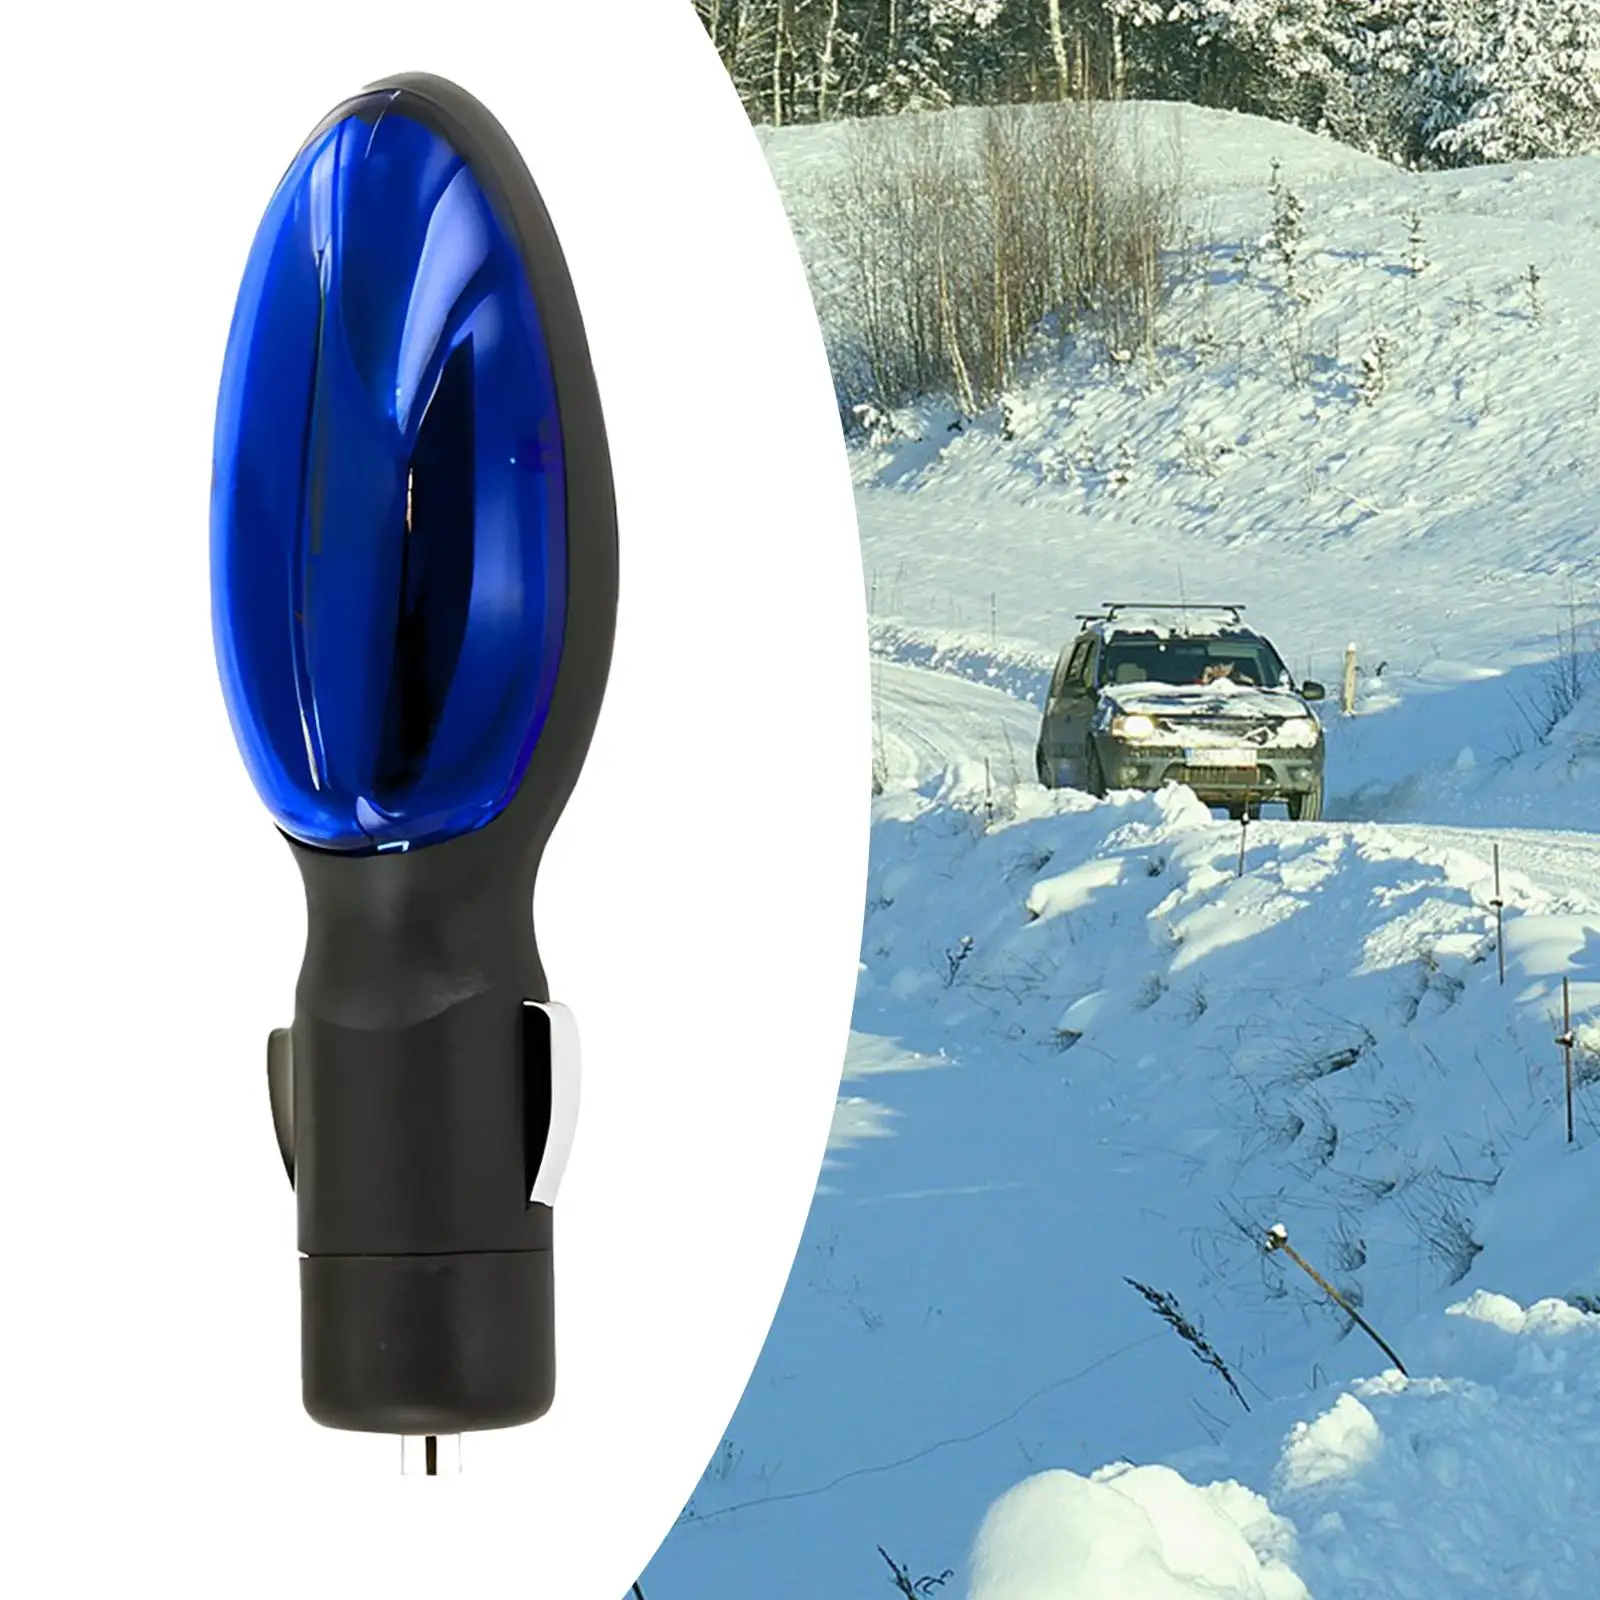 

Car Snow Removal Easy to Install Portable Antifreeze Winter Car Deicer Ice Thawing Tool for Automobile Truck Vehicle SUV RV